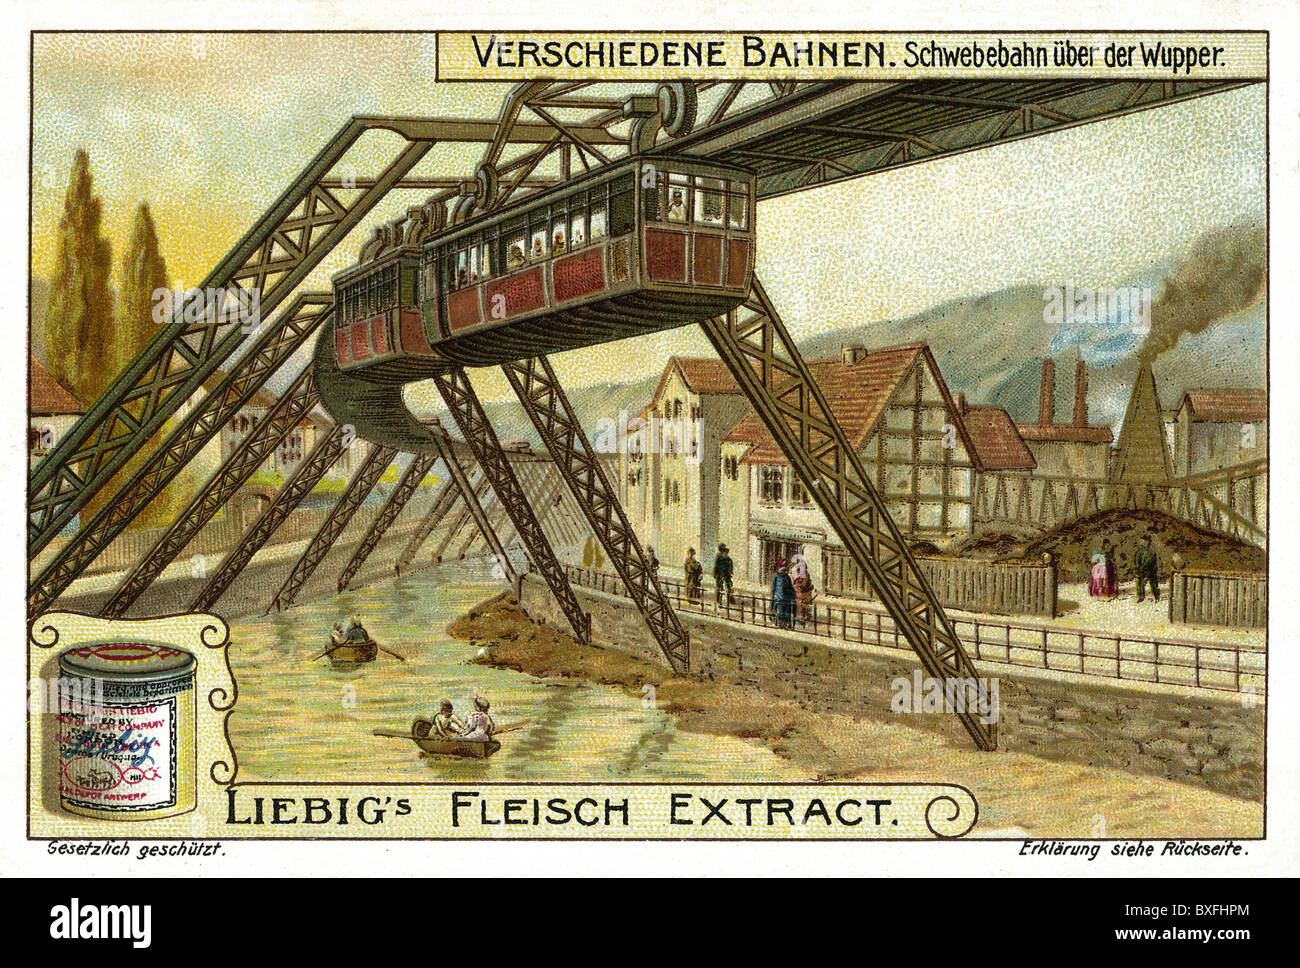 transport / transportation, railway, train, Wuppertal suspension railway, above the river Wupper, opened in 1901, 16 millions Goldmark costs, Liebig collection card, from series: different trains, lithograph, Germany, circa 1907, 1900s, 00s, 20th century, historic, historical, overhead track, overhead tracks, suspension railway, transportation, vehicle, public transport, public transportation, public transit, public conveyance, Vohwinkel, Elberfeld, Barmen, suburban services, local traffic, improvement, improvements, invention, inventions, people, Additional-Rights-Clearences-Not Available Stock Photo